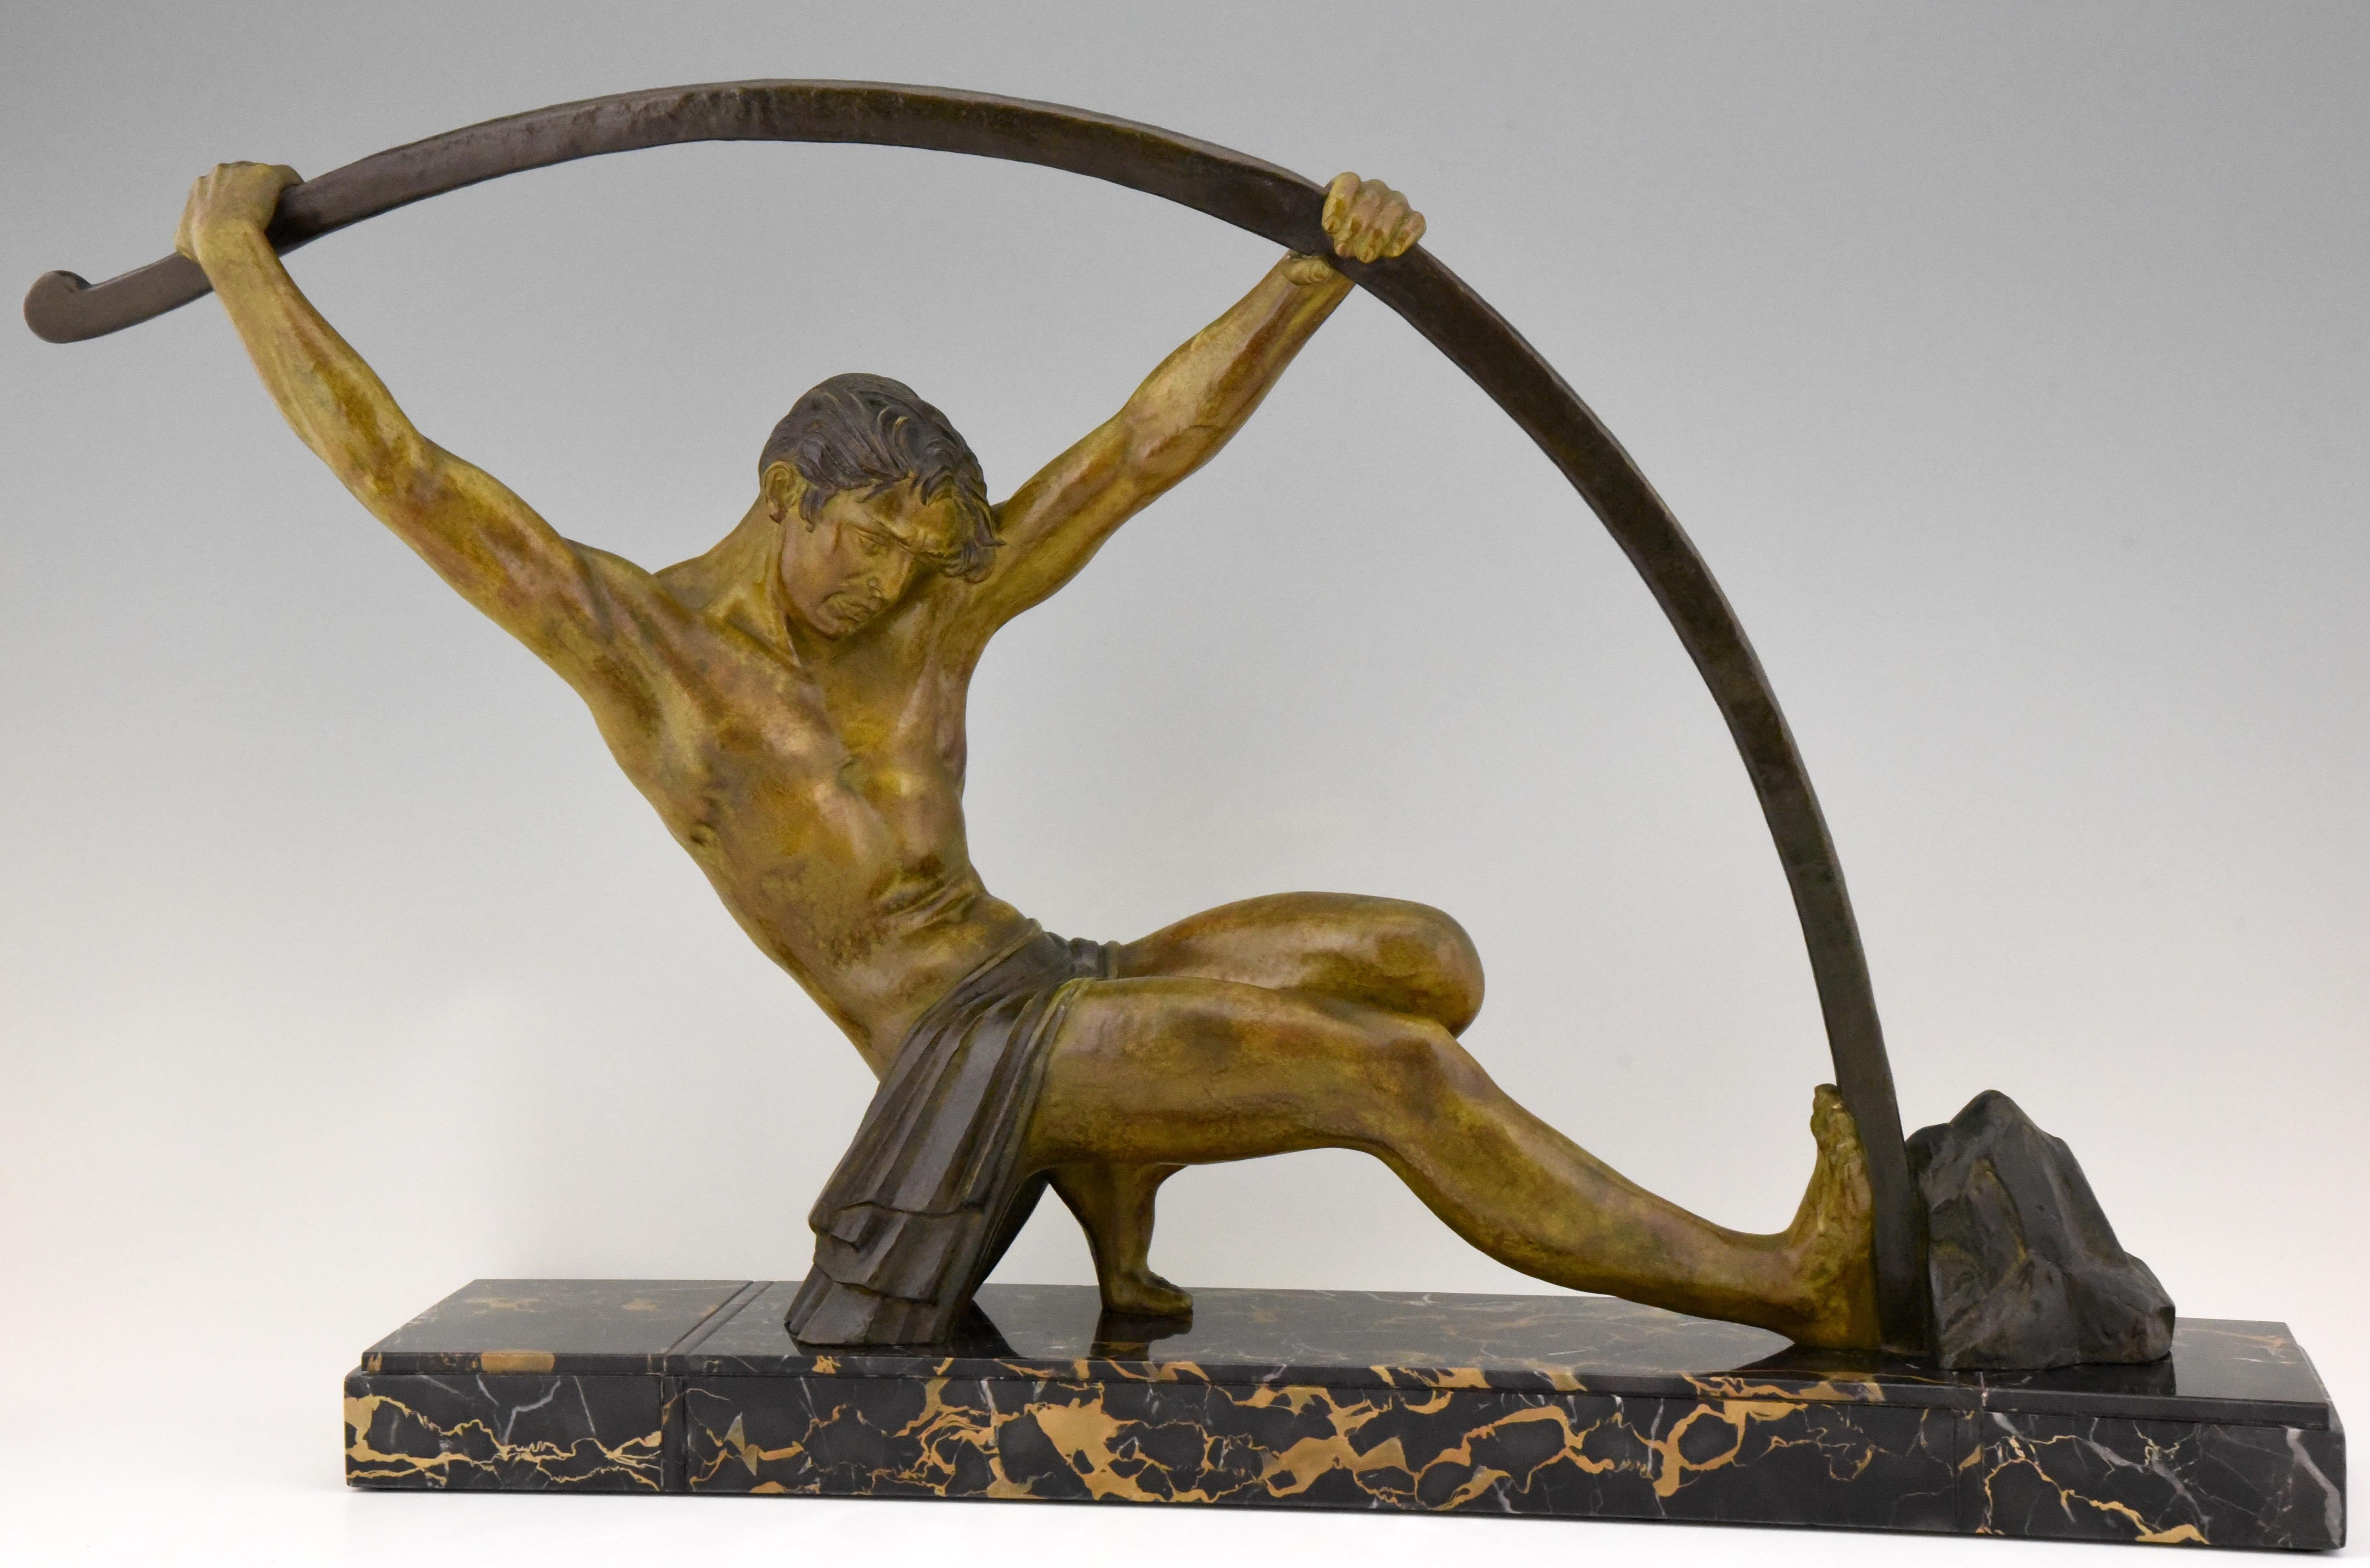 Impressive Art Deco sculpture of an athletic man bending a bar.
This work is titled l'age du bronze and signed by Demetre H. Chiparus.
The sculpture has a beautiful patina and stands on a fine Portor marble base France circa 1930.

This model is